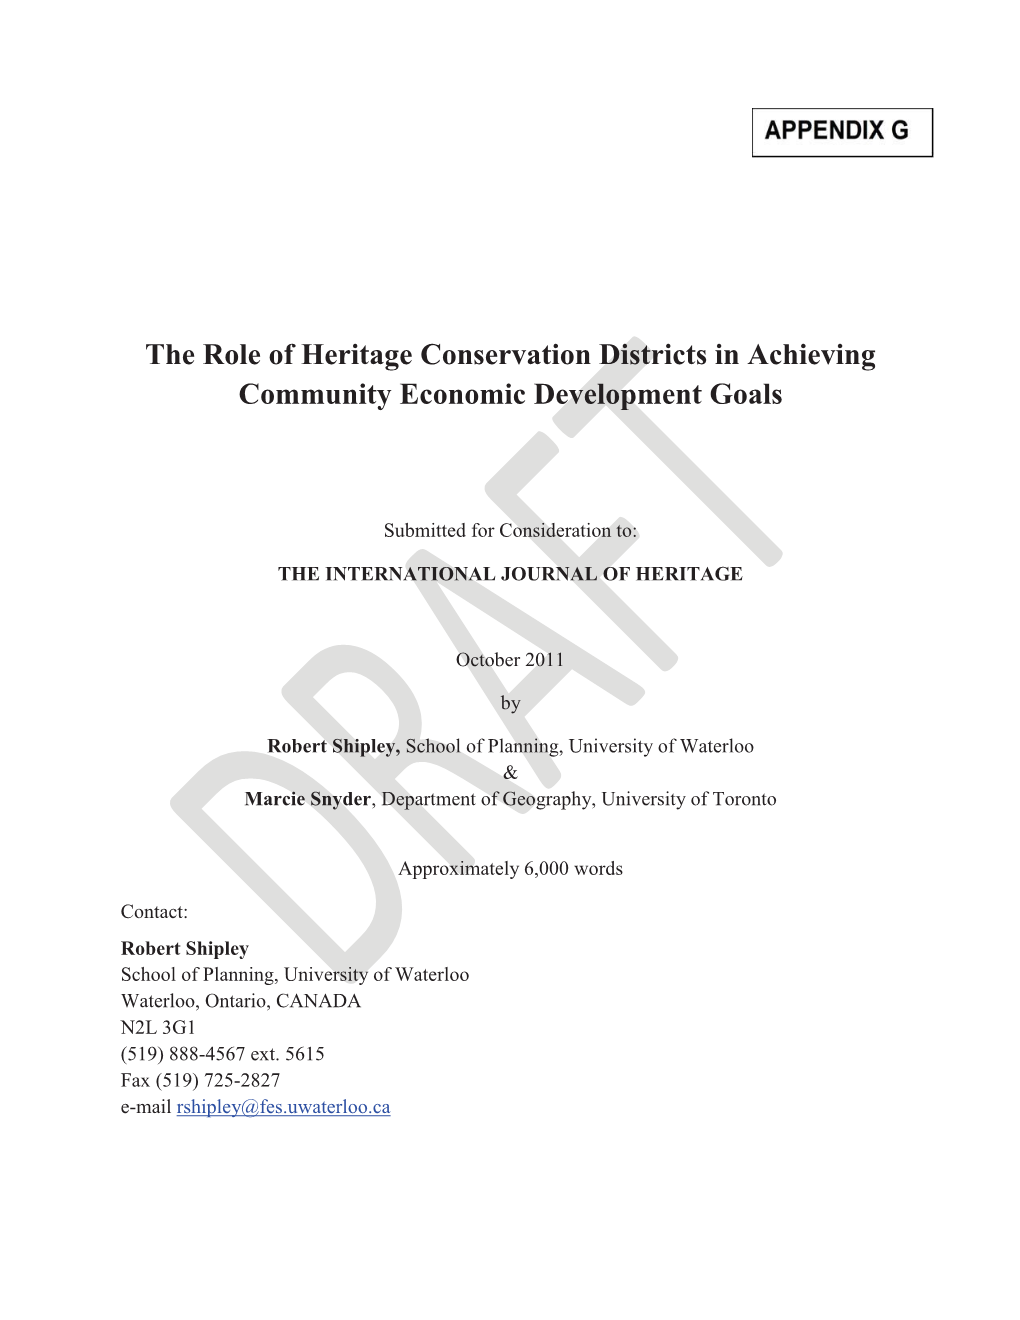 The Role of Heritage Conservation Districts in Achieving Community Economic Development Goals